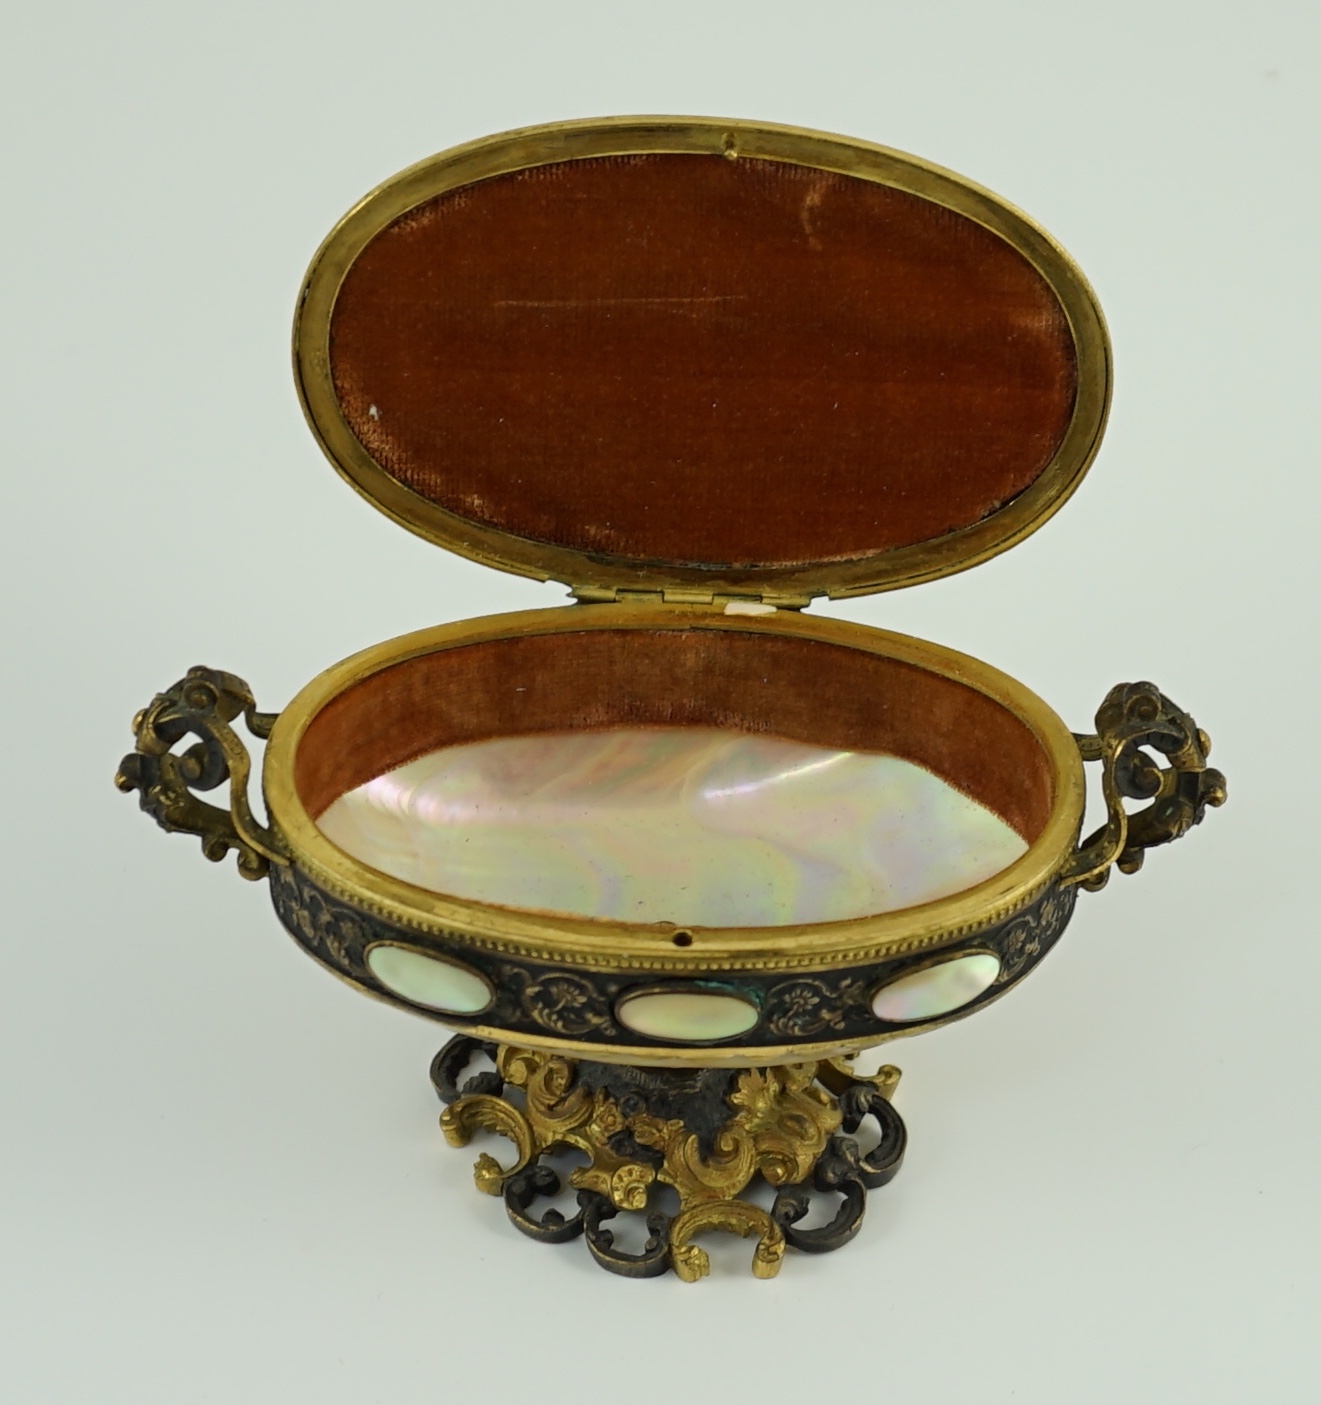 A 19th century Italian silvered and ormolu mounted mother of pearl casket, width 15cm, depth 7cm, height 11cm